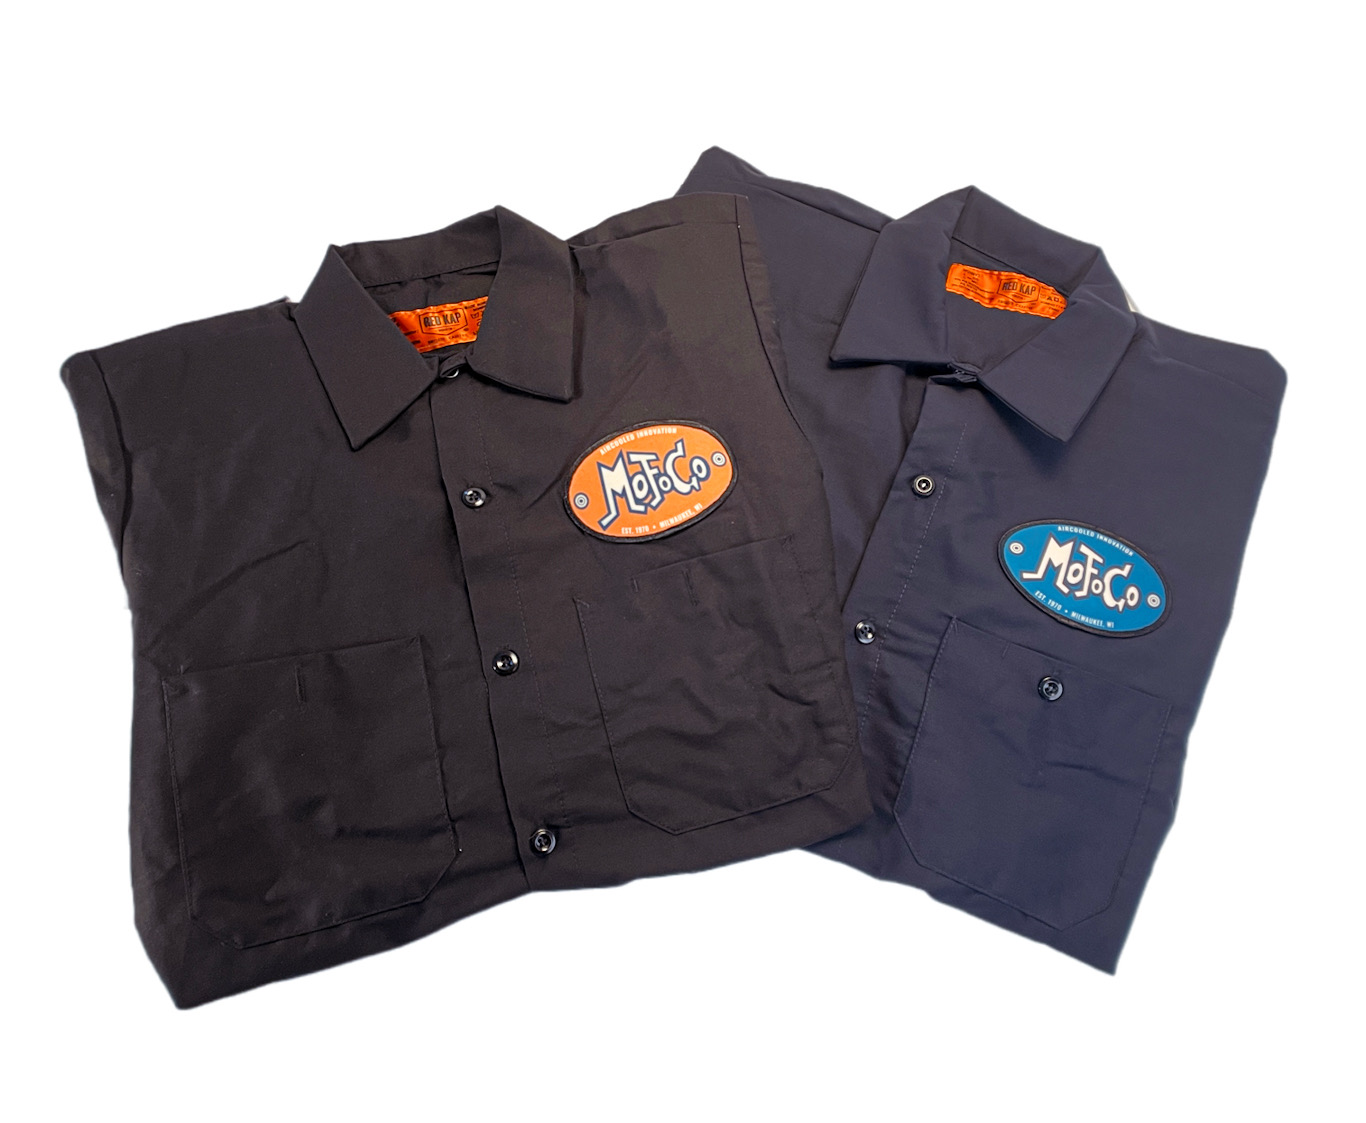 Genuine Red Kap Shop Shirt w/ MOFOCO AIRCOOLED INNOVATION Patch - Specify Size & Color